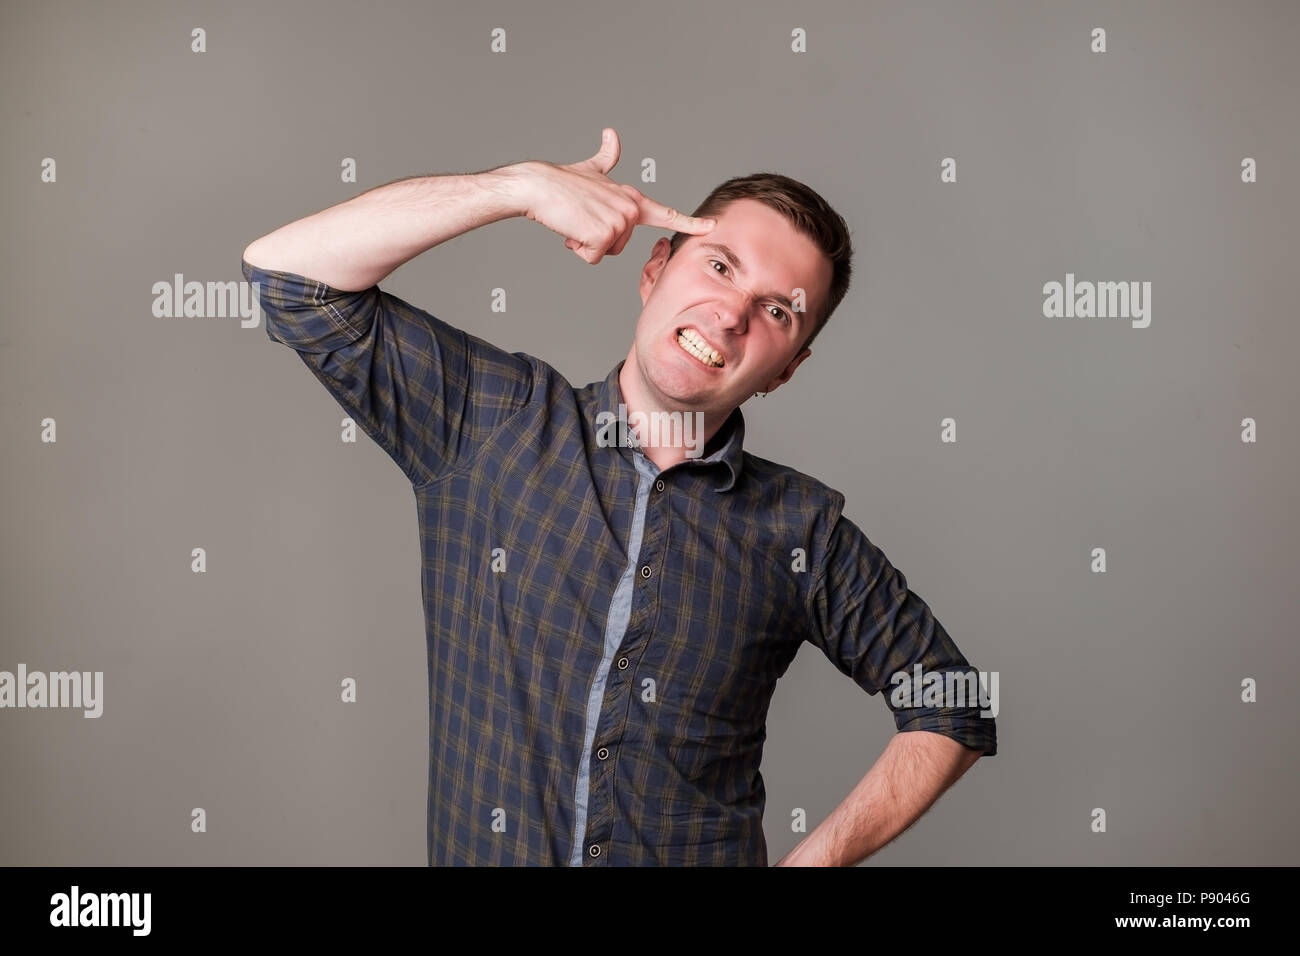 Tired or bored european guy holding gun gesture near temples and making faces while standing over gray background. Stock Photo